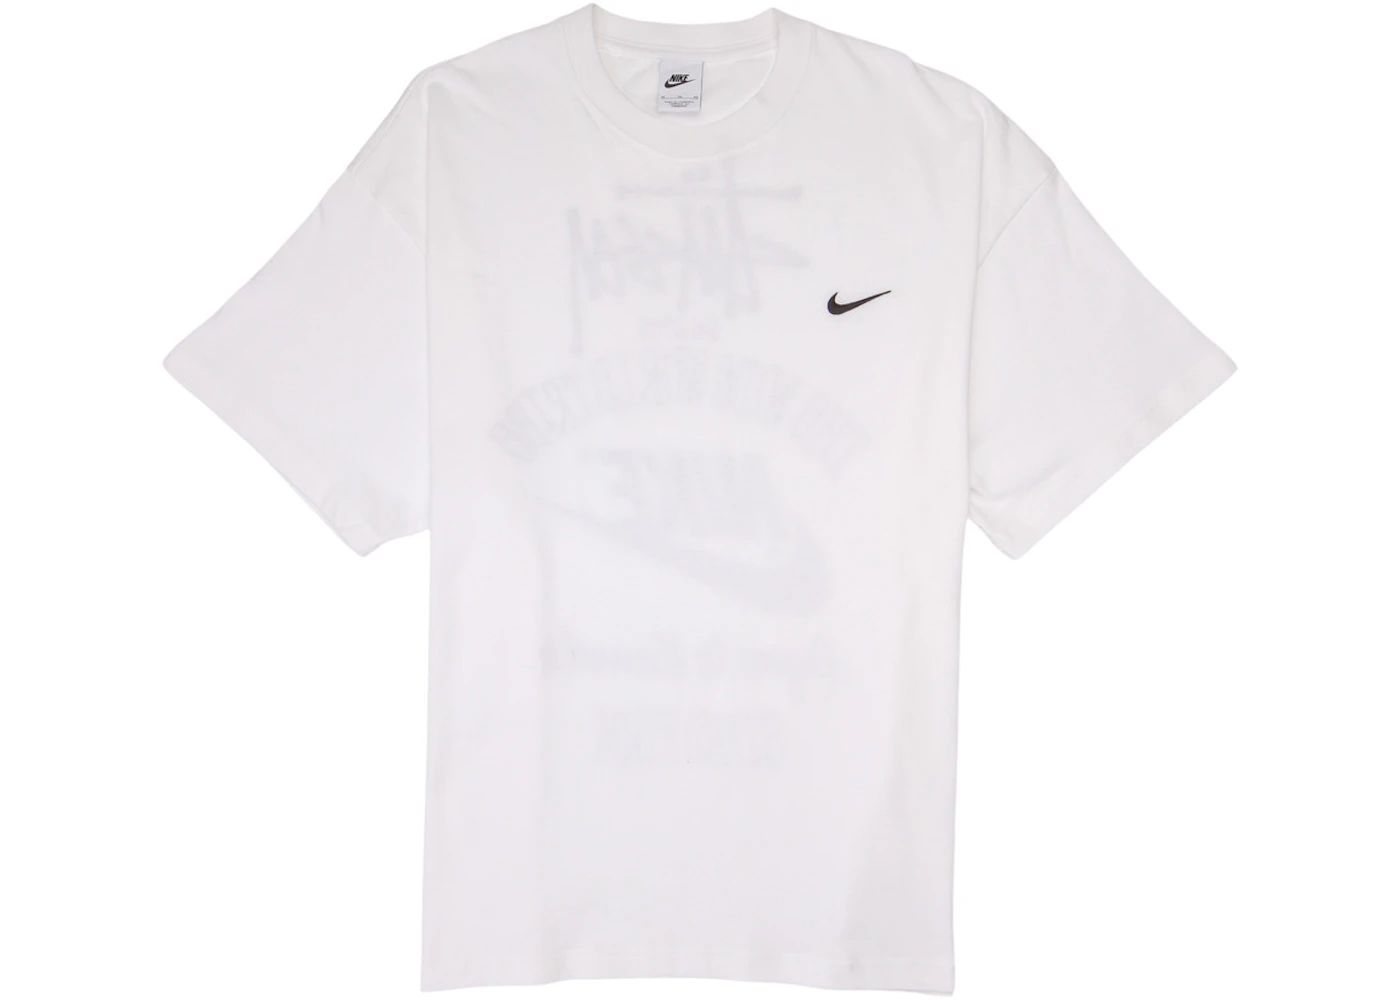 Nike x Stussy The Wide World Tribe T-Shirt White Men's - SS23 - US